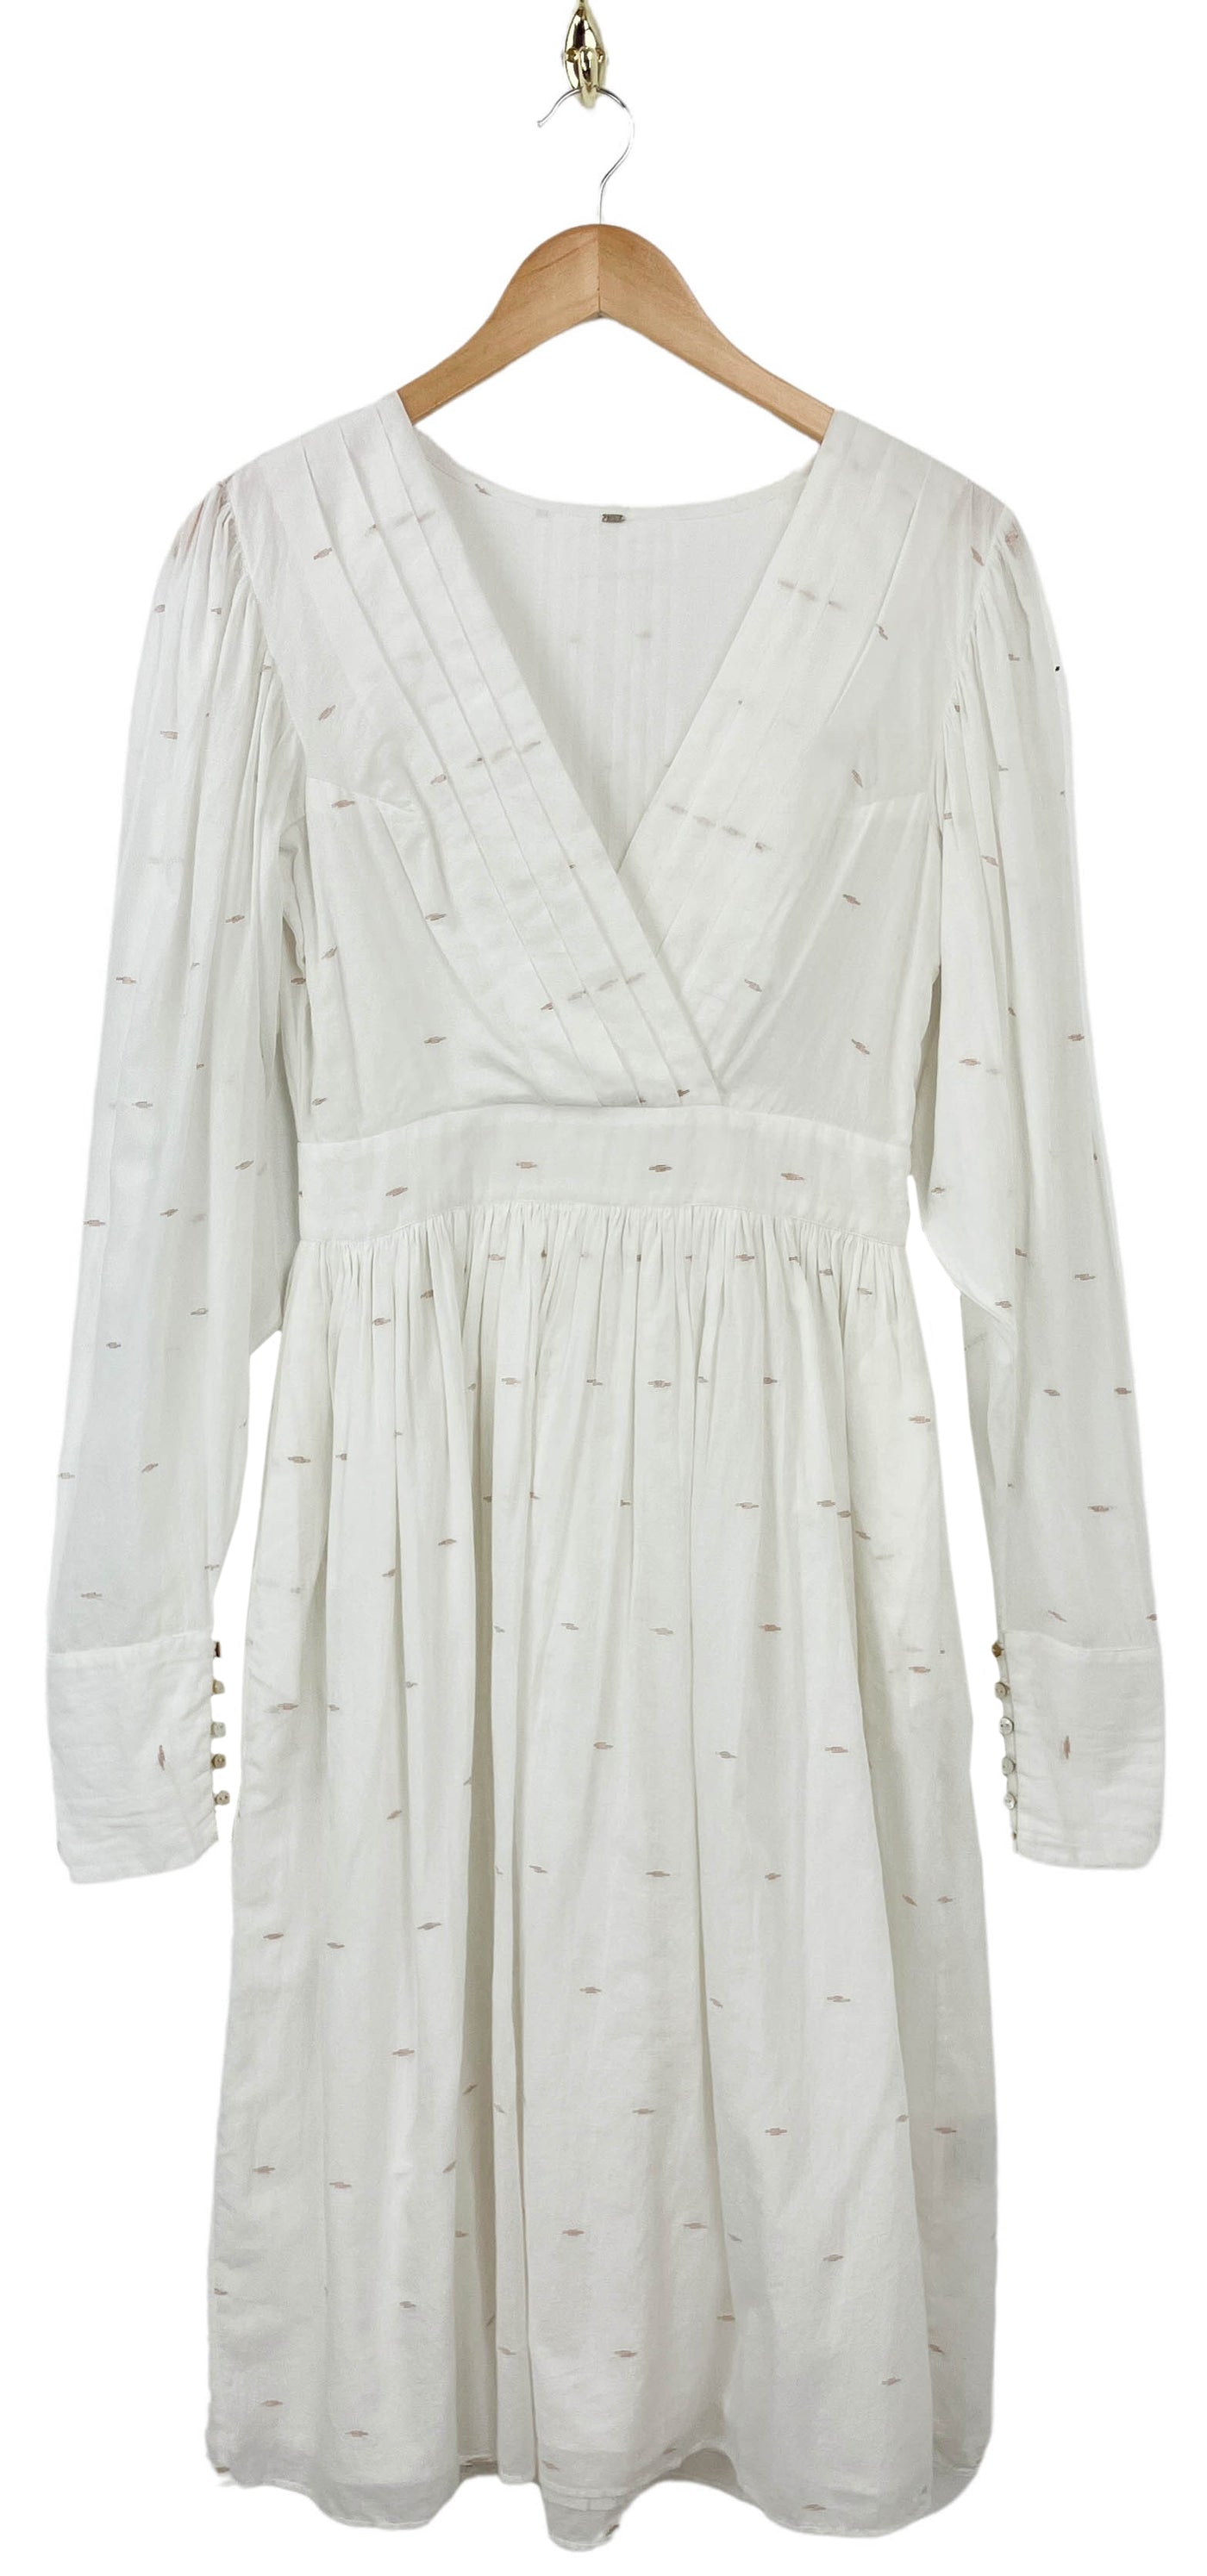 Mimi Prober Ann Gigot Sleeve Pleated Dress in White - Discounts on Mimi Prober at UAL